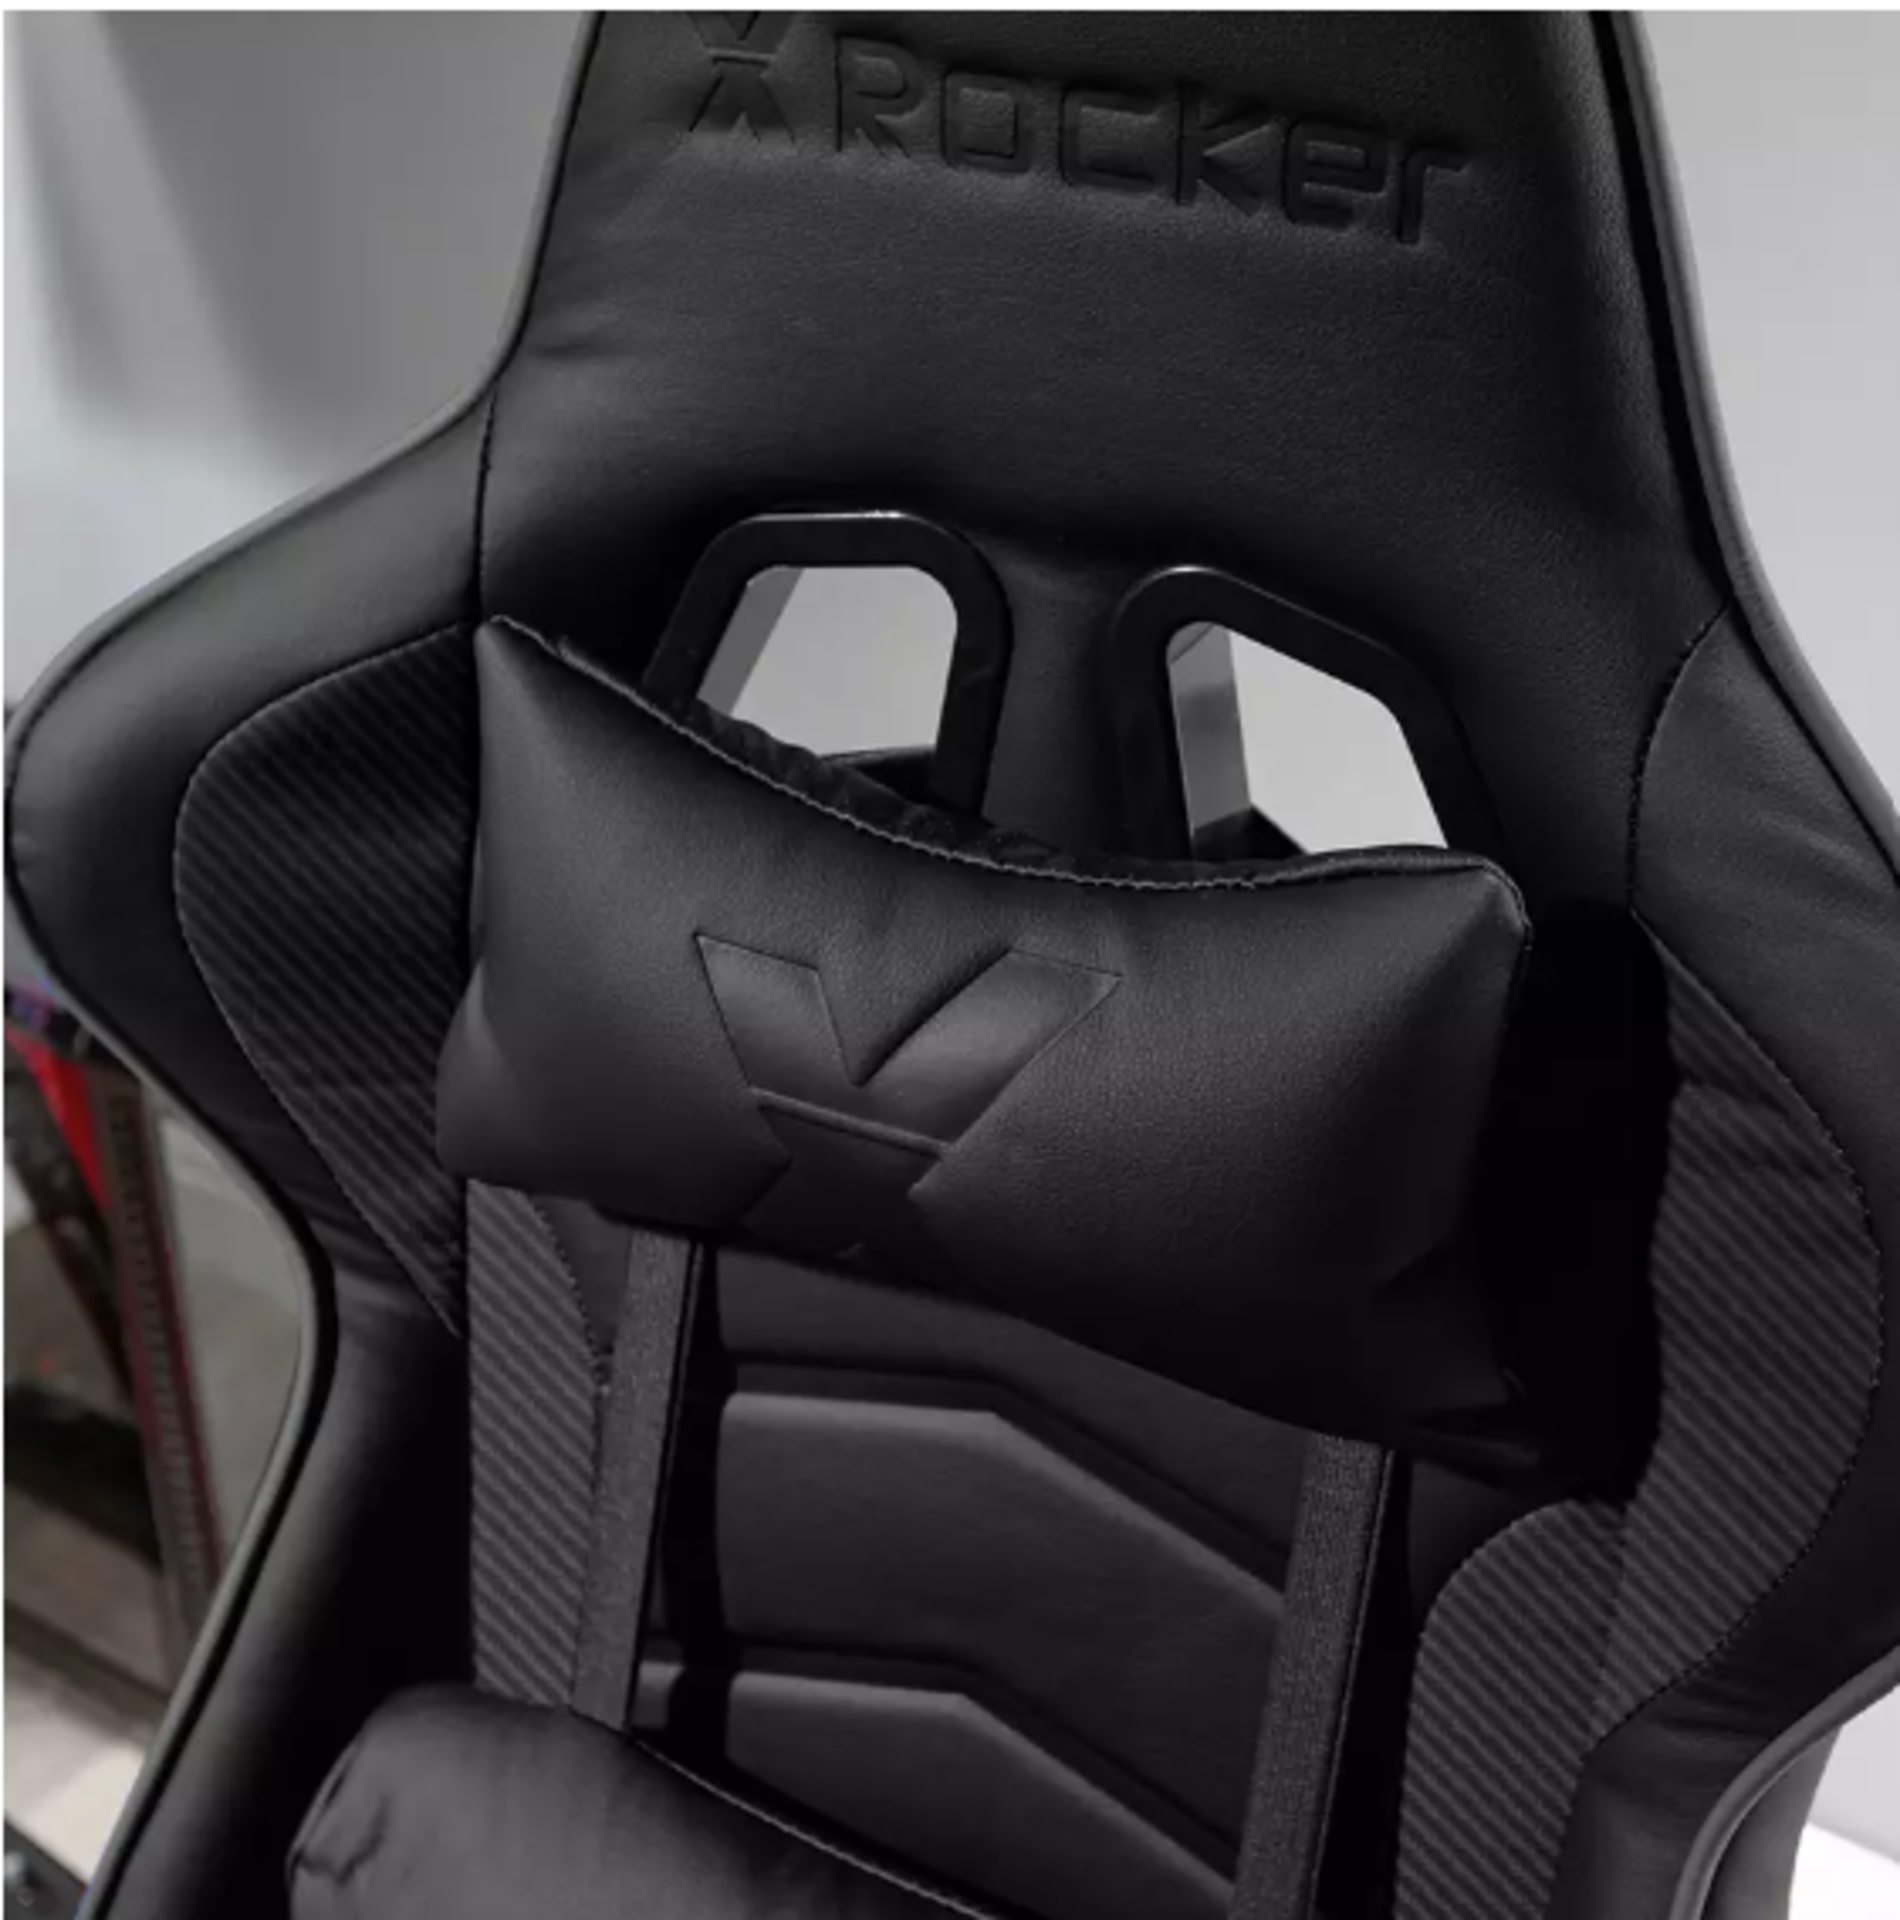 X Rocker Alpha eSports Ergonomic Office Gaming Chair -Black. RRP £190.00. Get gaming with the X - Image 3 of 3